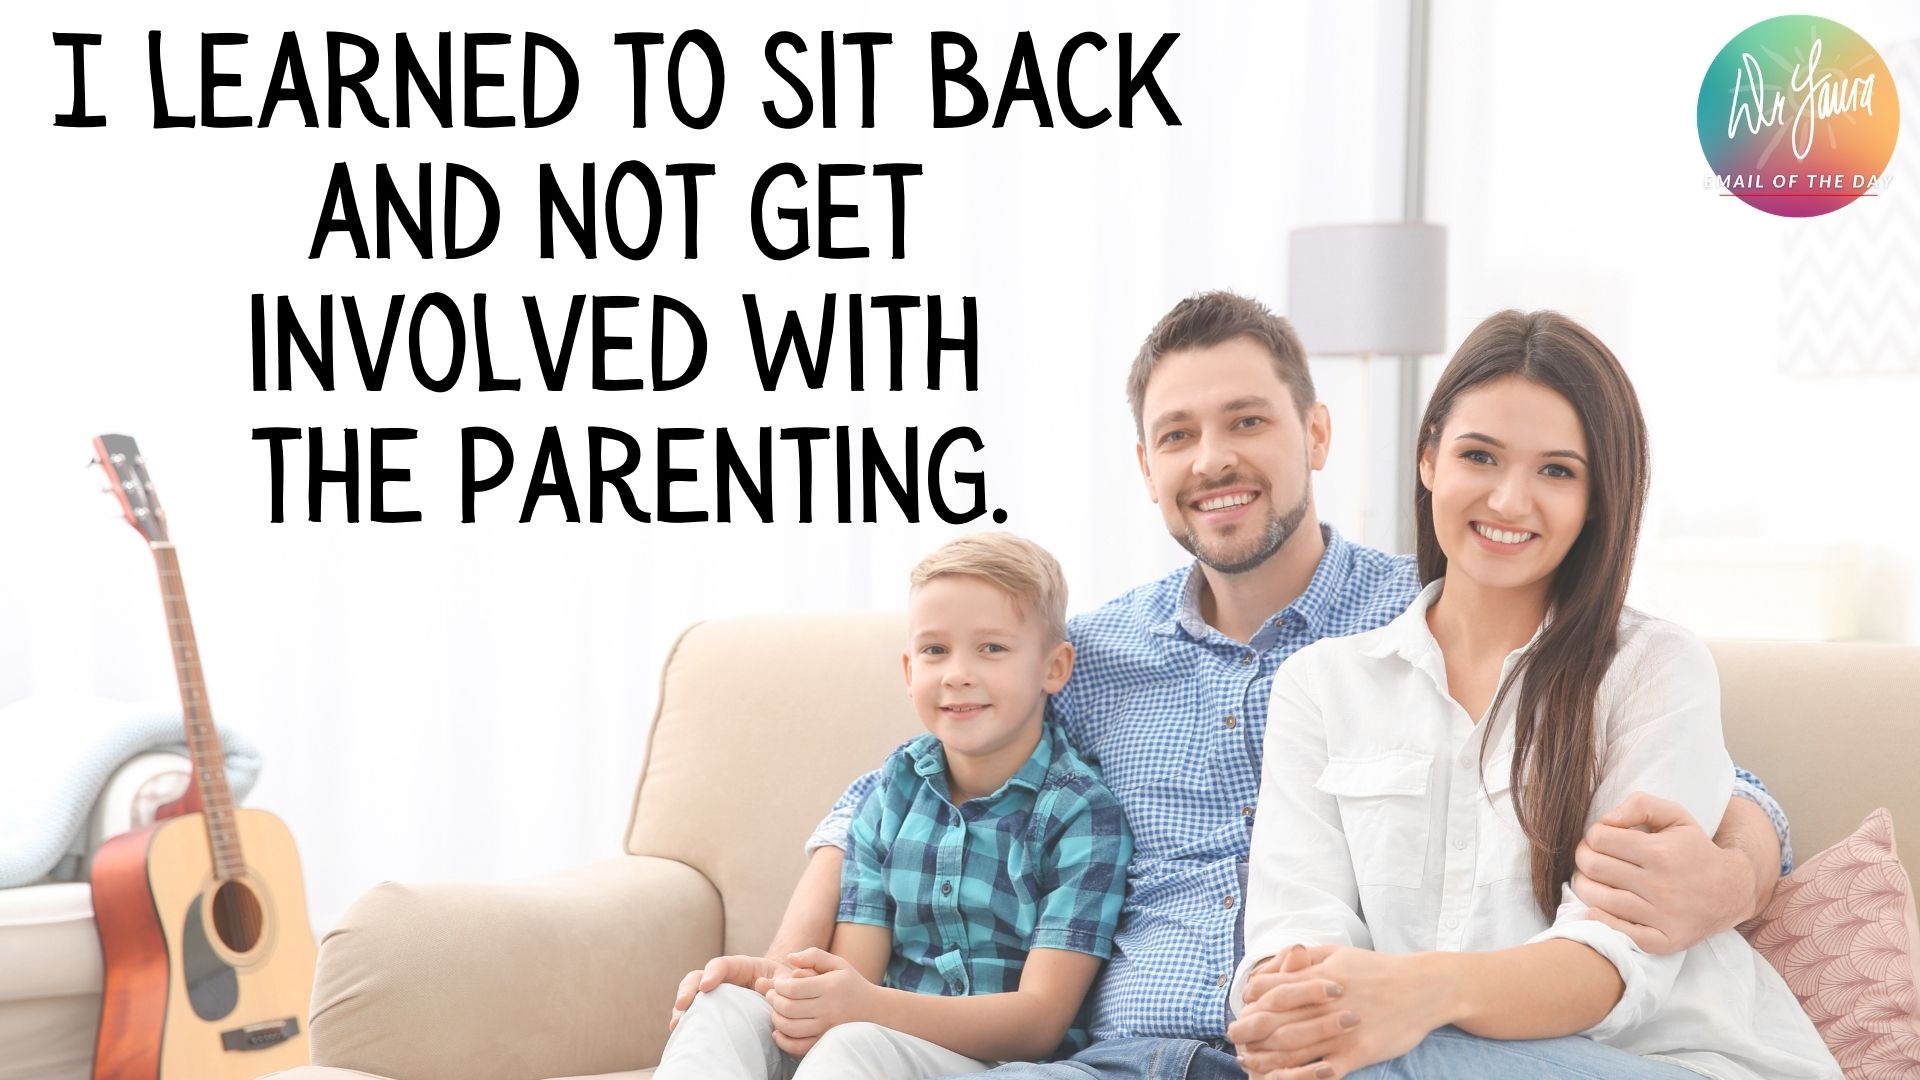 Email of the Day: Don’t Call Me a “Step-Parent”